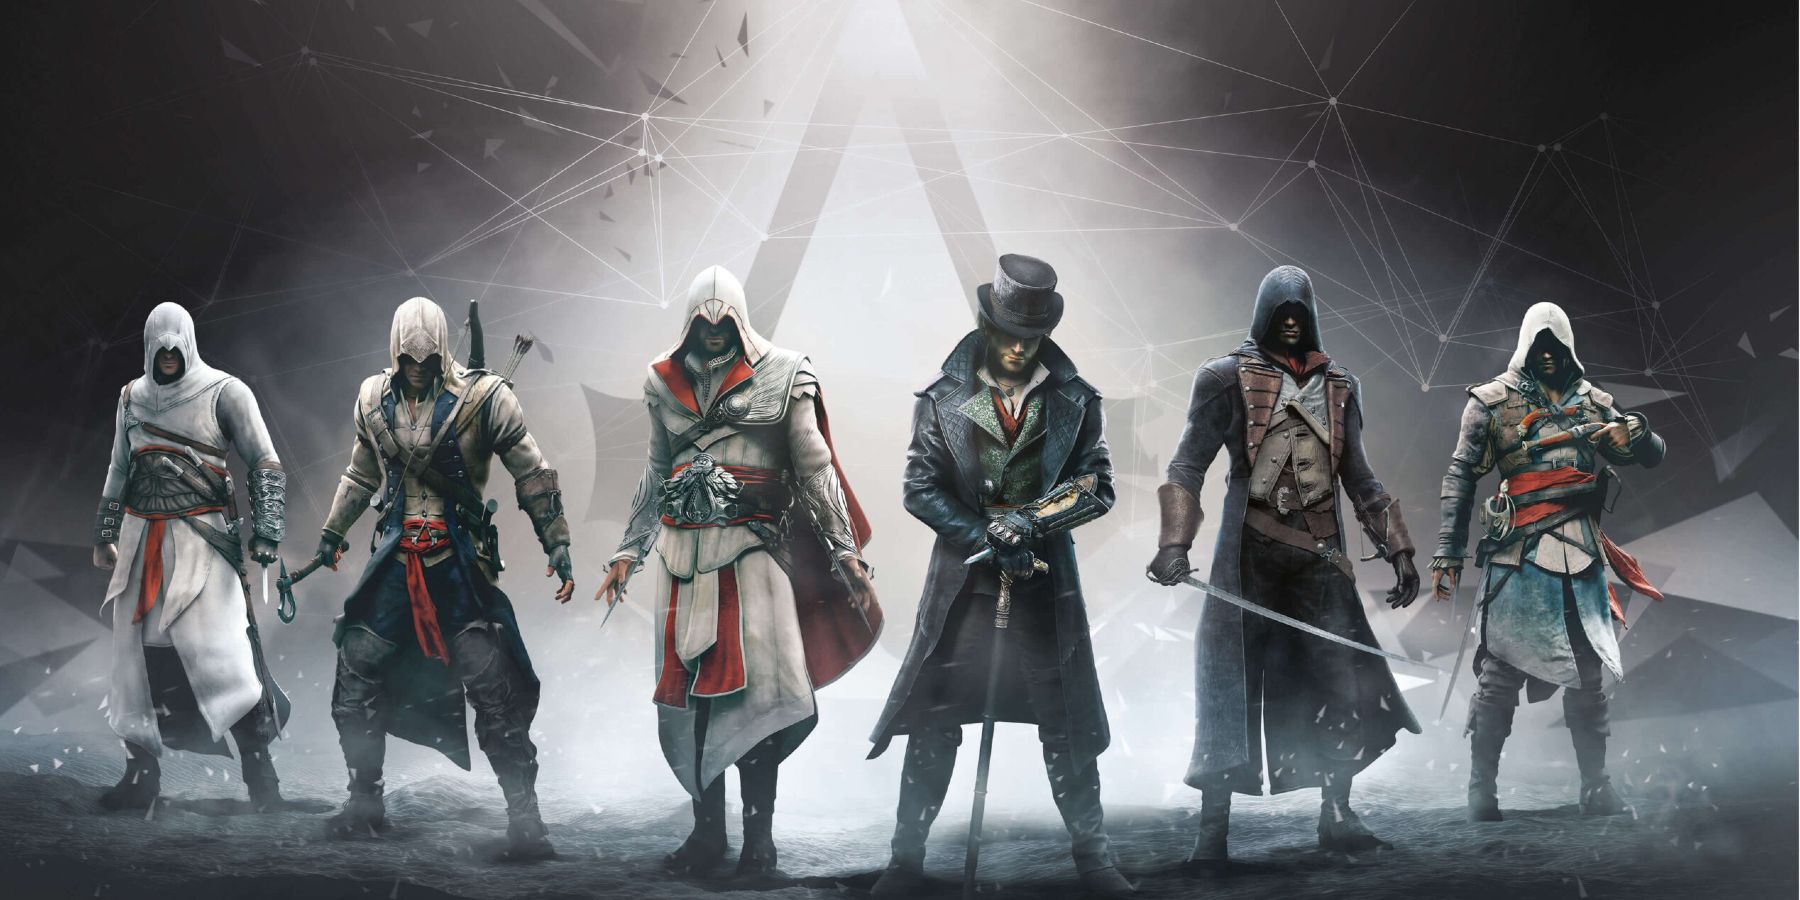 Assassin's Creed Rift Would Inherently Have Major Connections to AC1